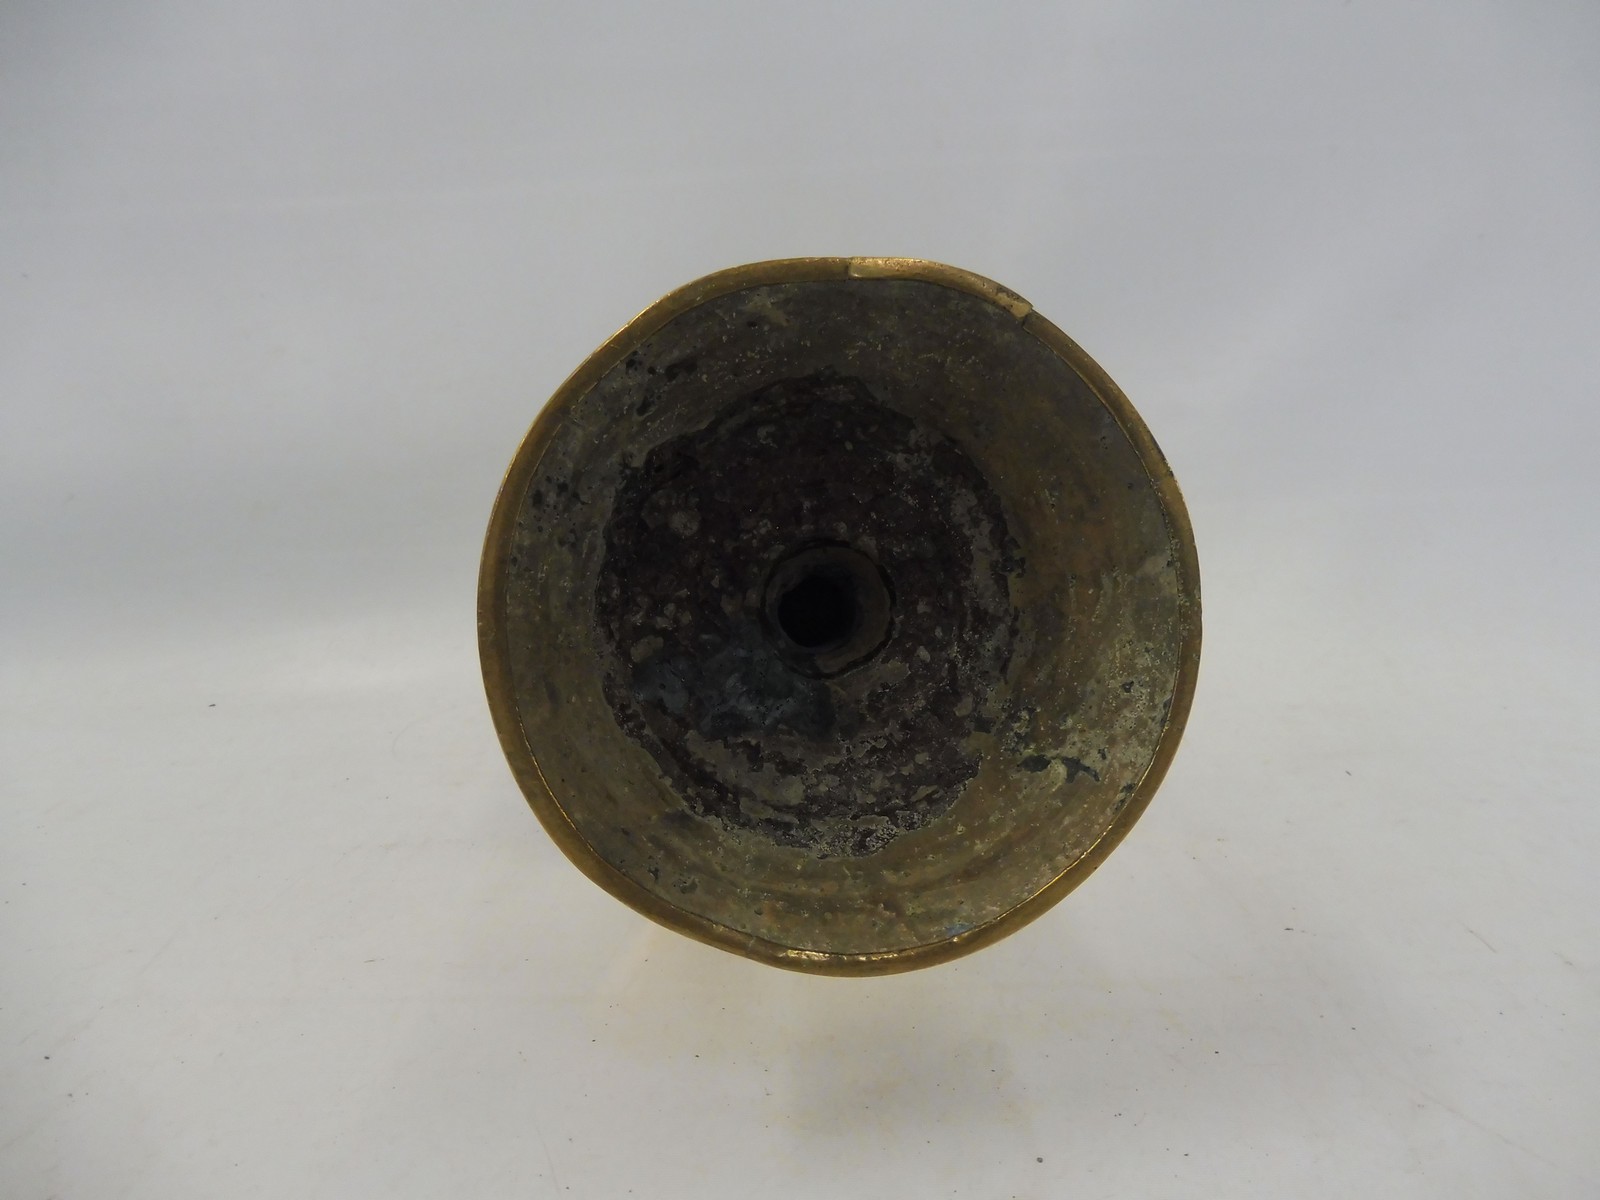 A 17th Century Dutch West Indies brass pricket candlestick with a broad mid drip pan, 11" long. - Image 5 of 5